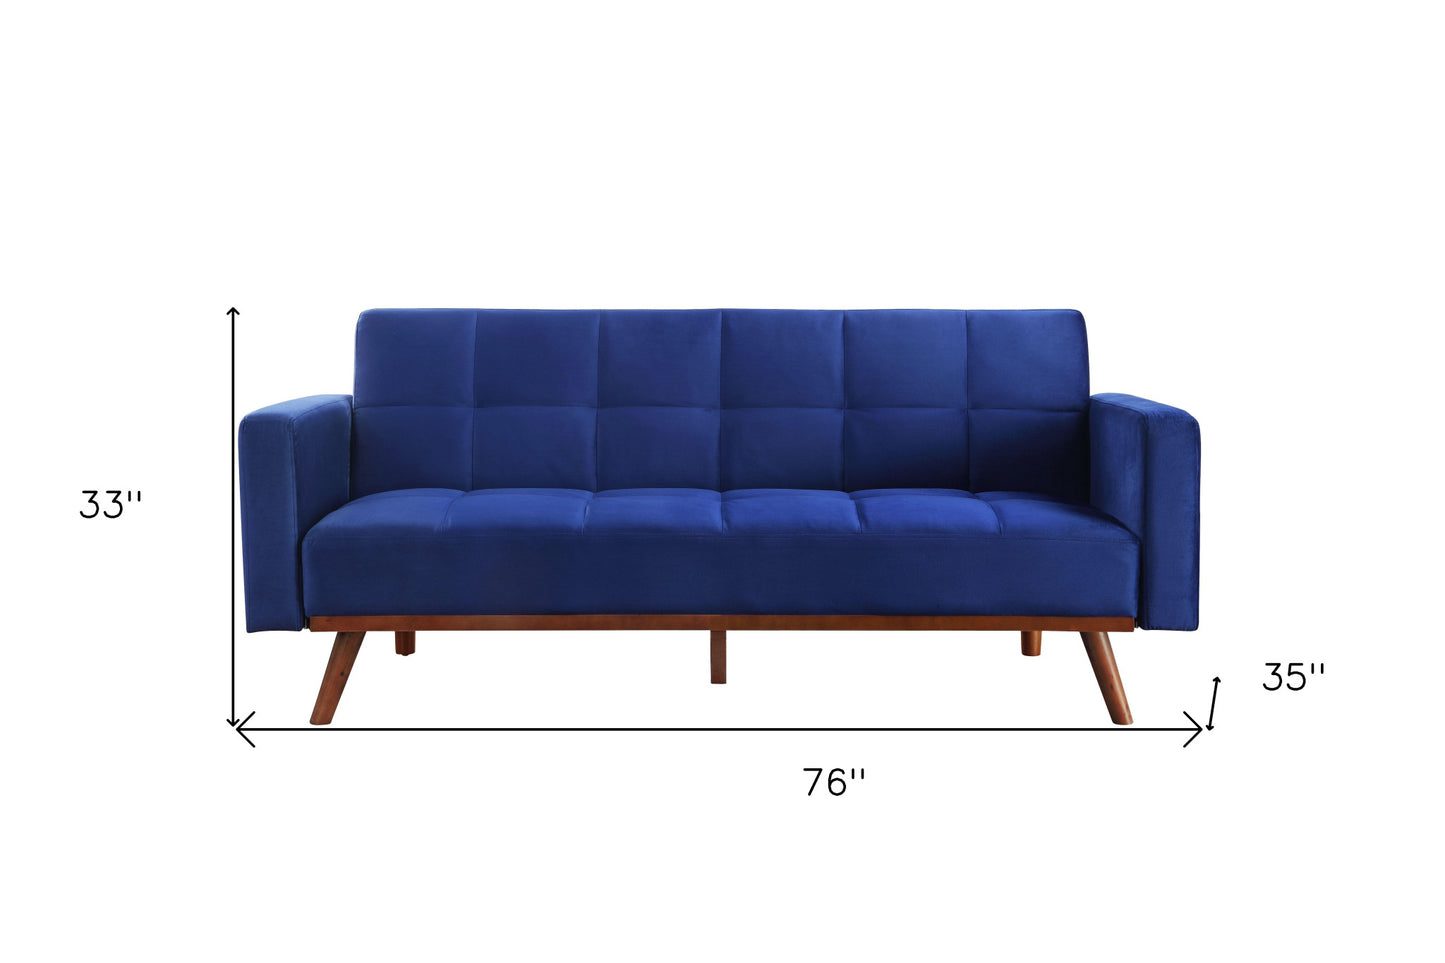 76" Blue Velvet And NAtural Sleeper Sofa By Homeroots